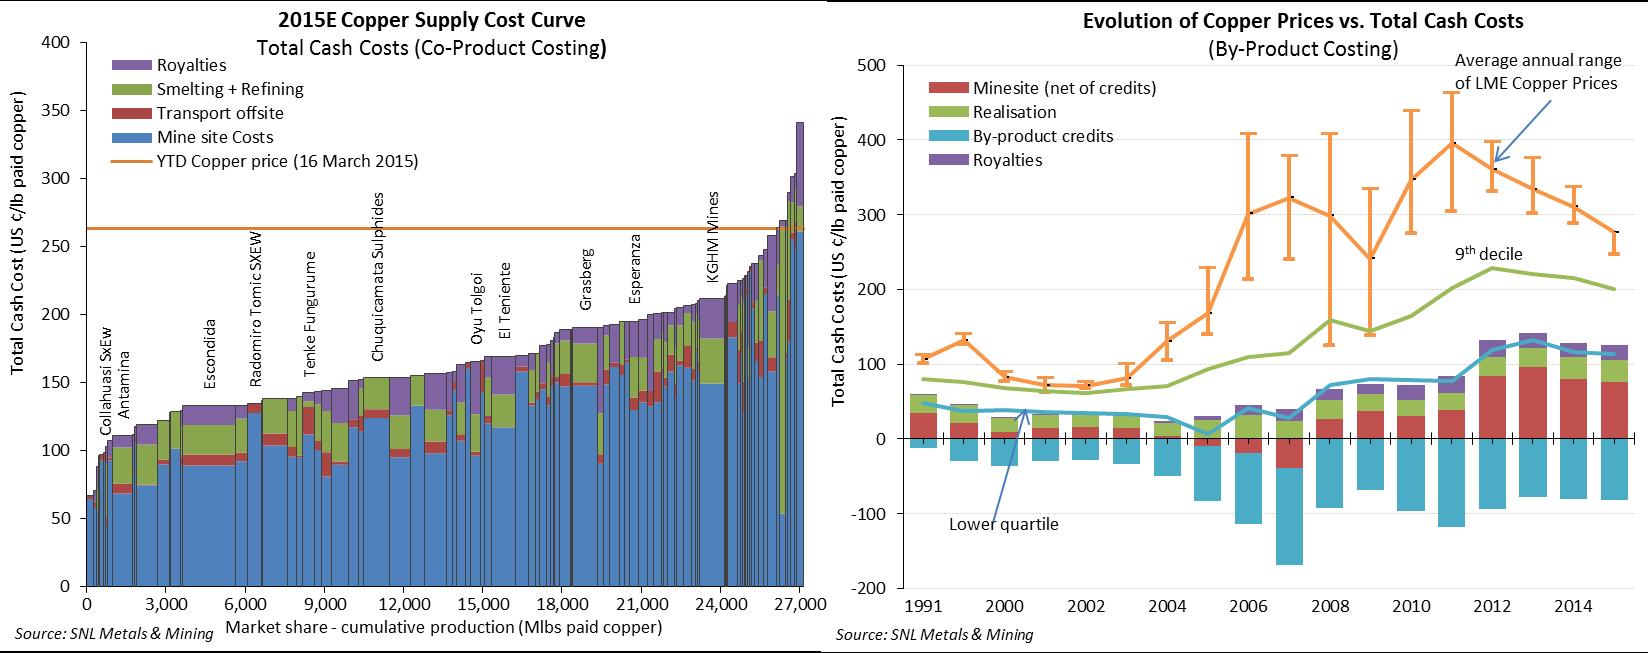 2015E Copper Supply Cost Curve AND Evolution of Copper Prices v. Total Cash Costs